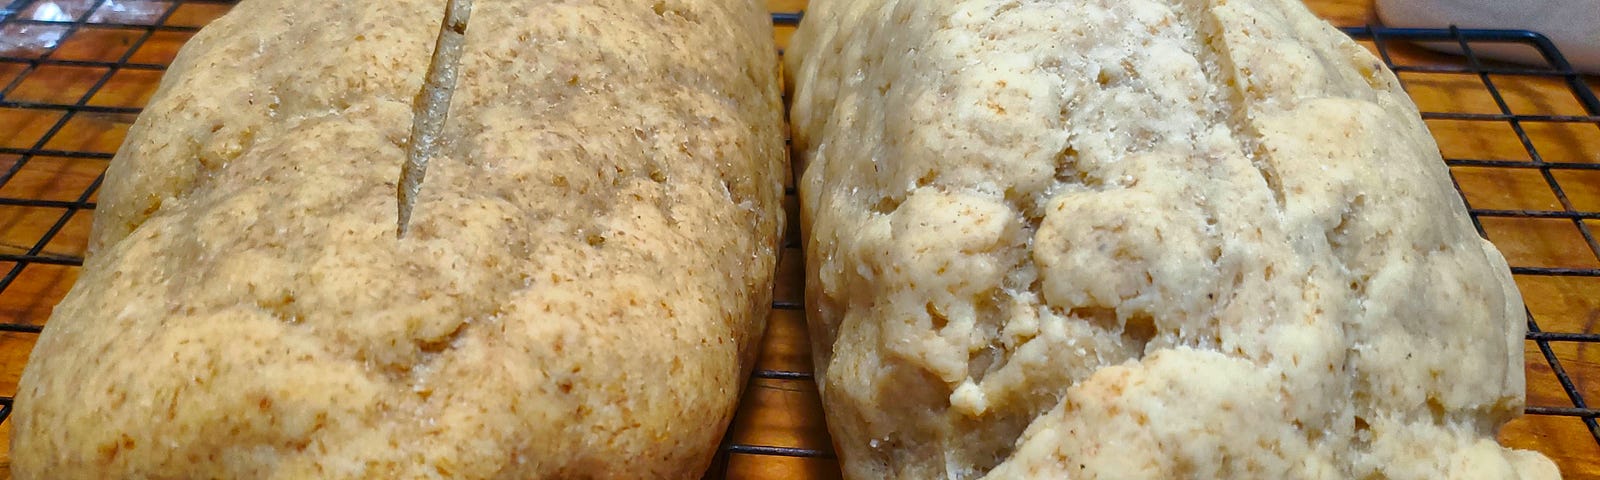 Two loaves of homemade bread cooling on a wire rack. The loaf on the right is a lighter color than the loaf on the left, which is a tan color. The rack is sitting on a wooden cutting board.